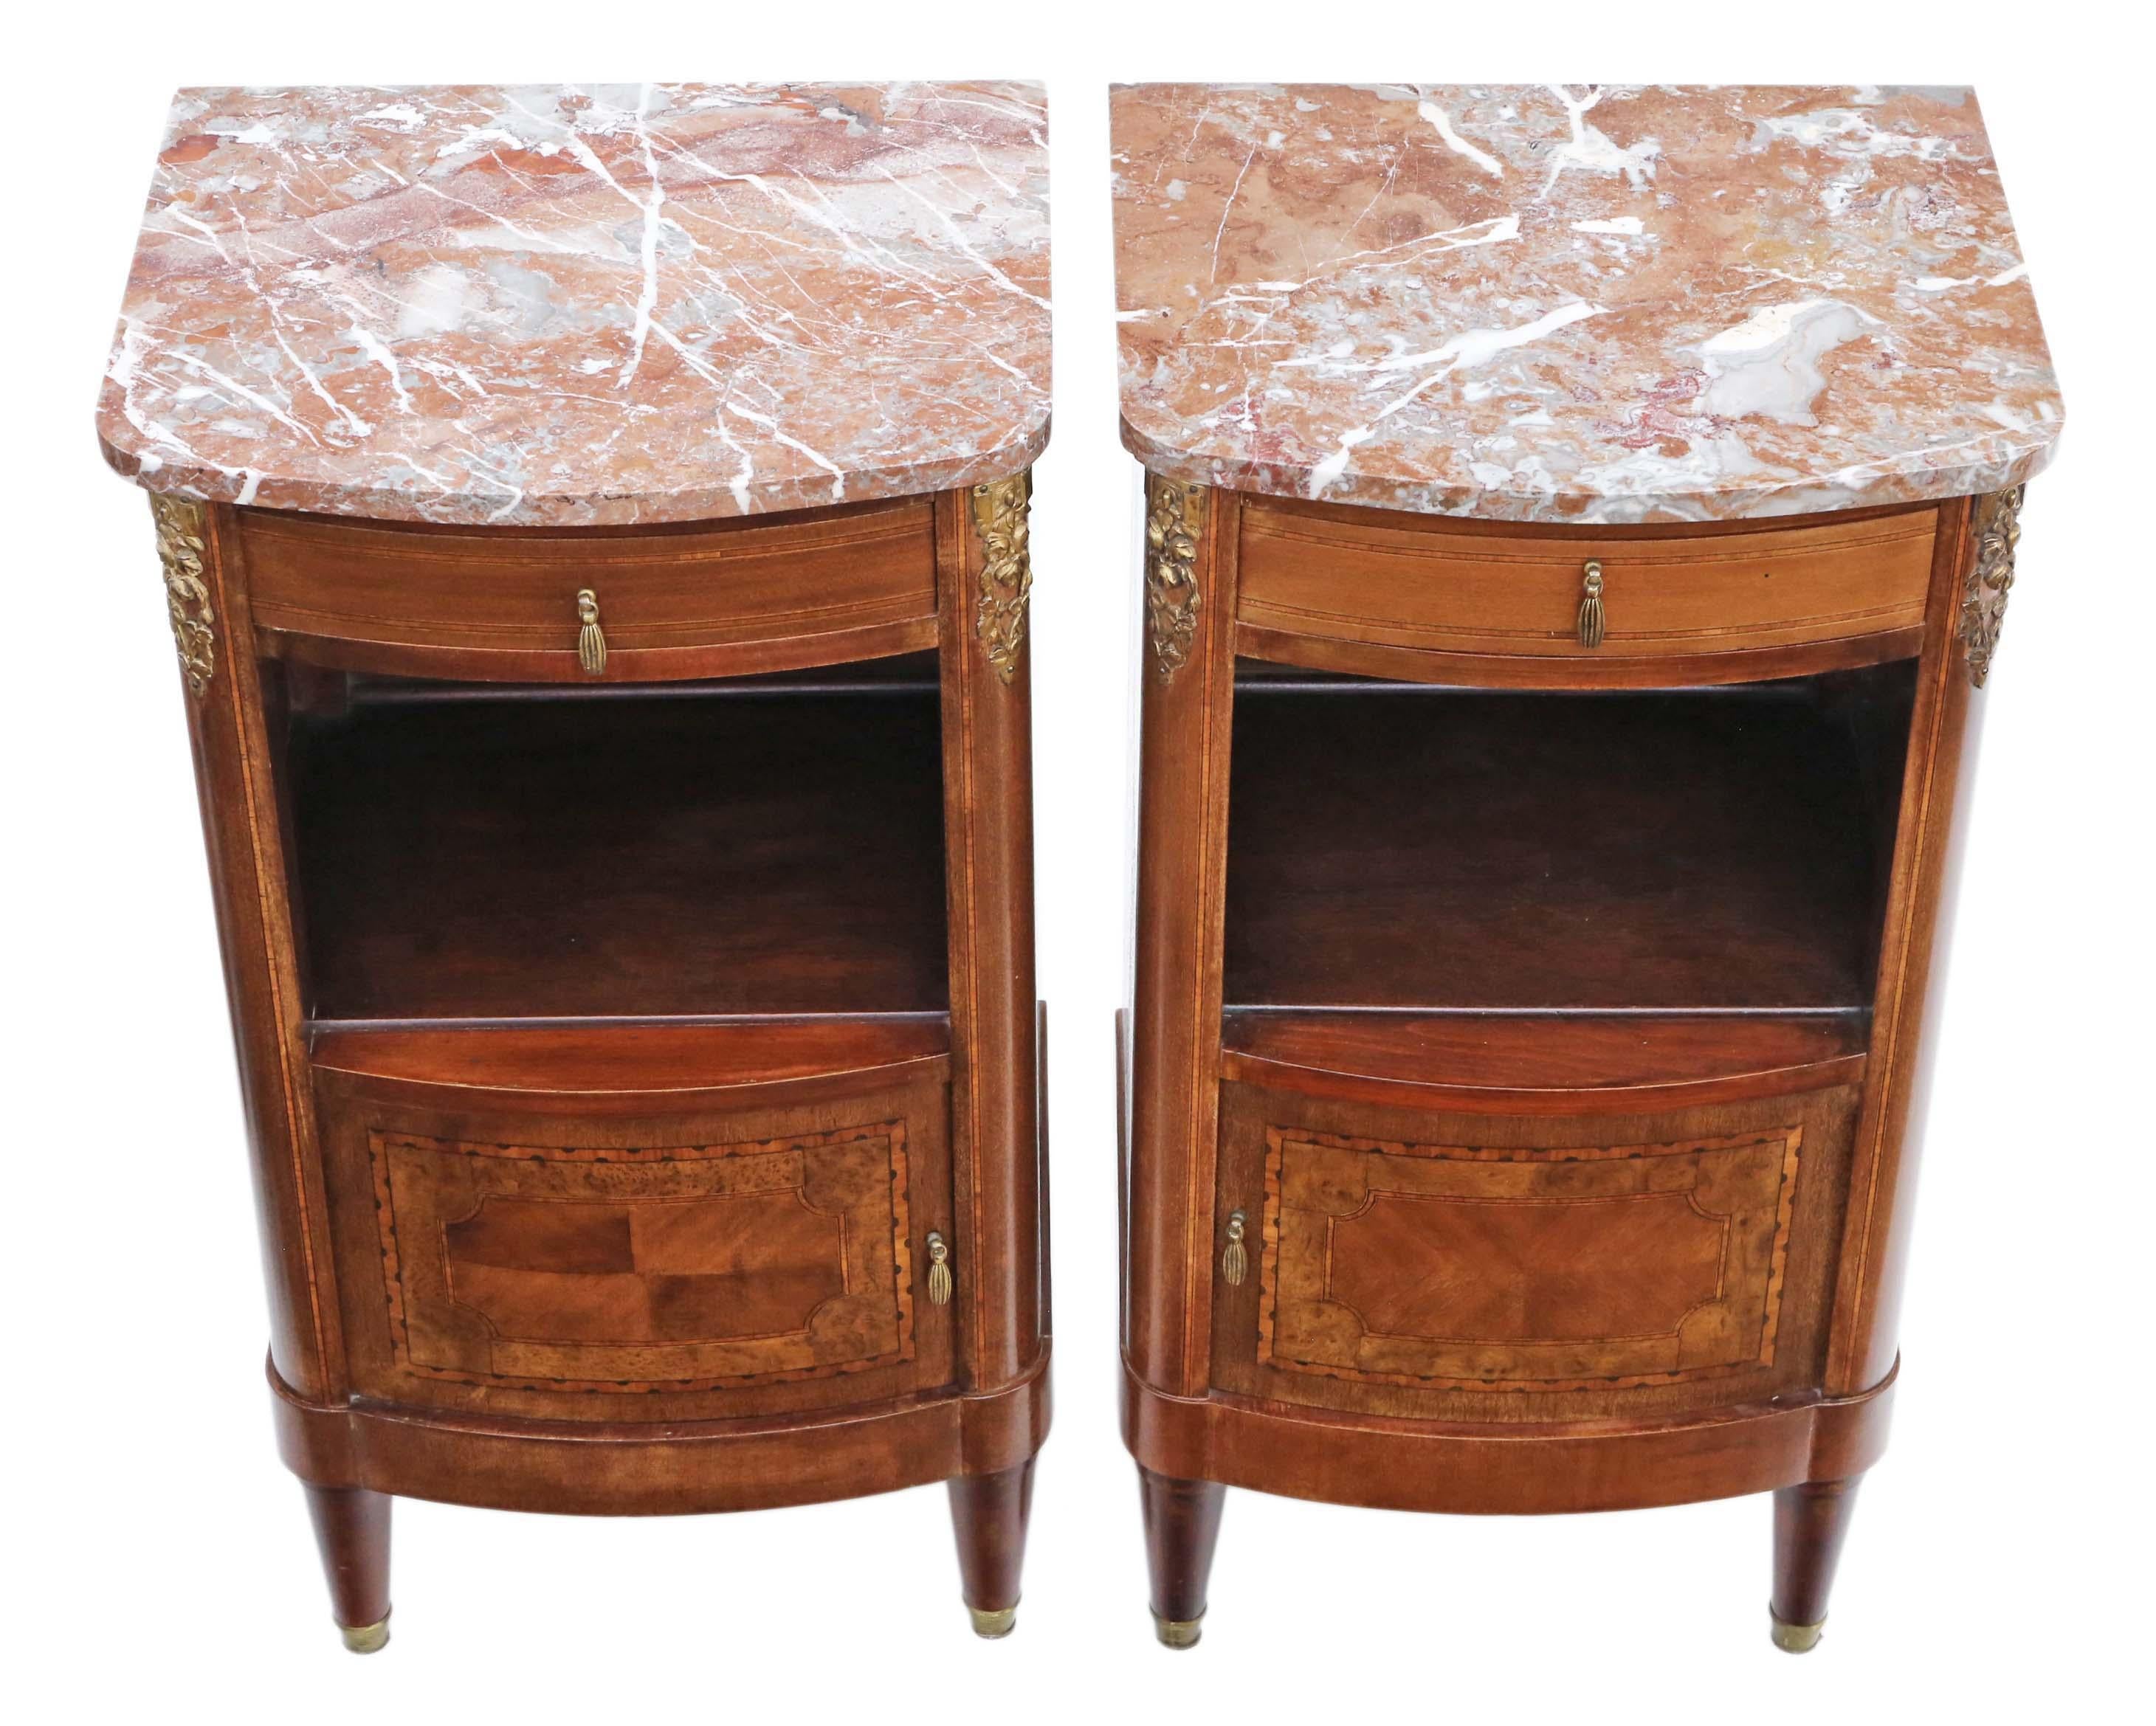 Antique fine quality pair of French marquetry bedside tables cupboards with marble tops, C1930.

No loose joints The drawers slide freely and there are working catches to the cupboards.

Would look great in the right location!

Overall maximum